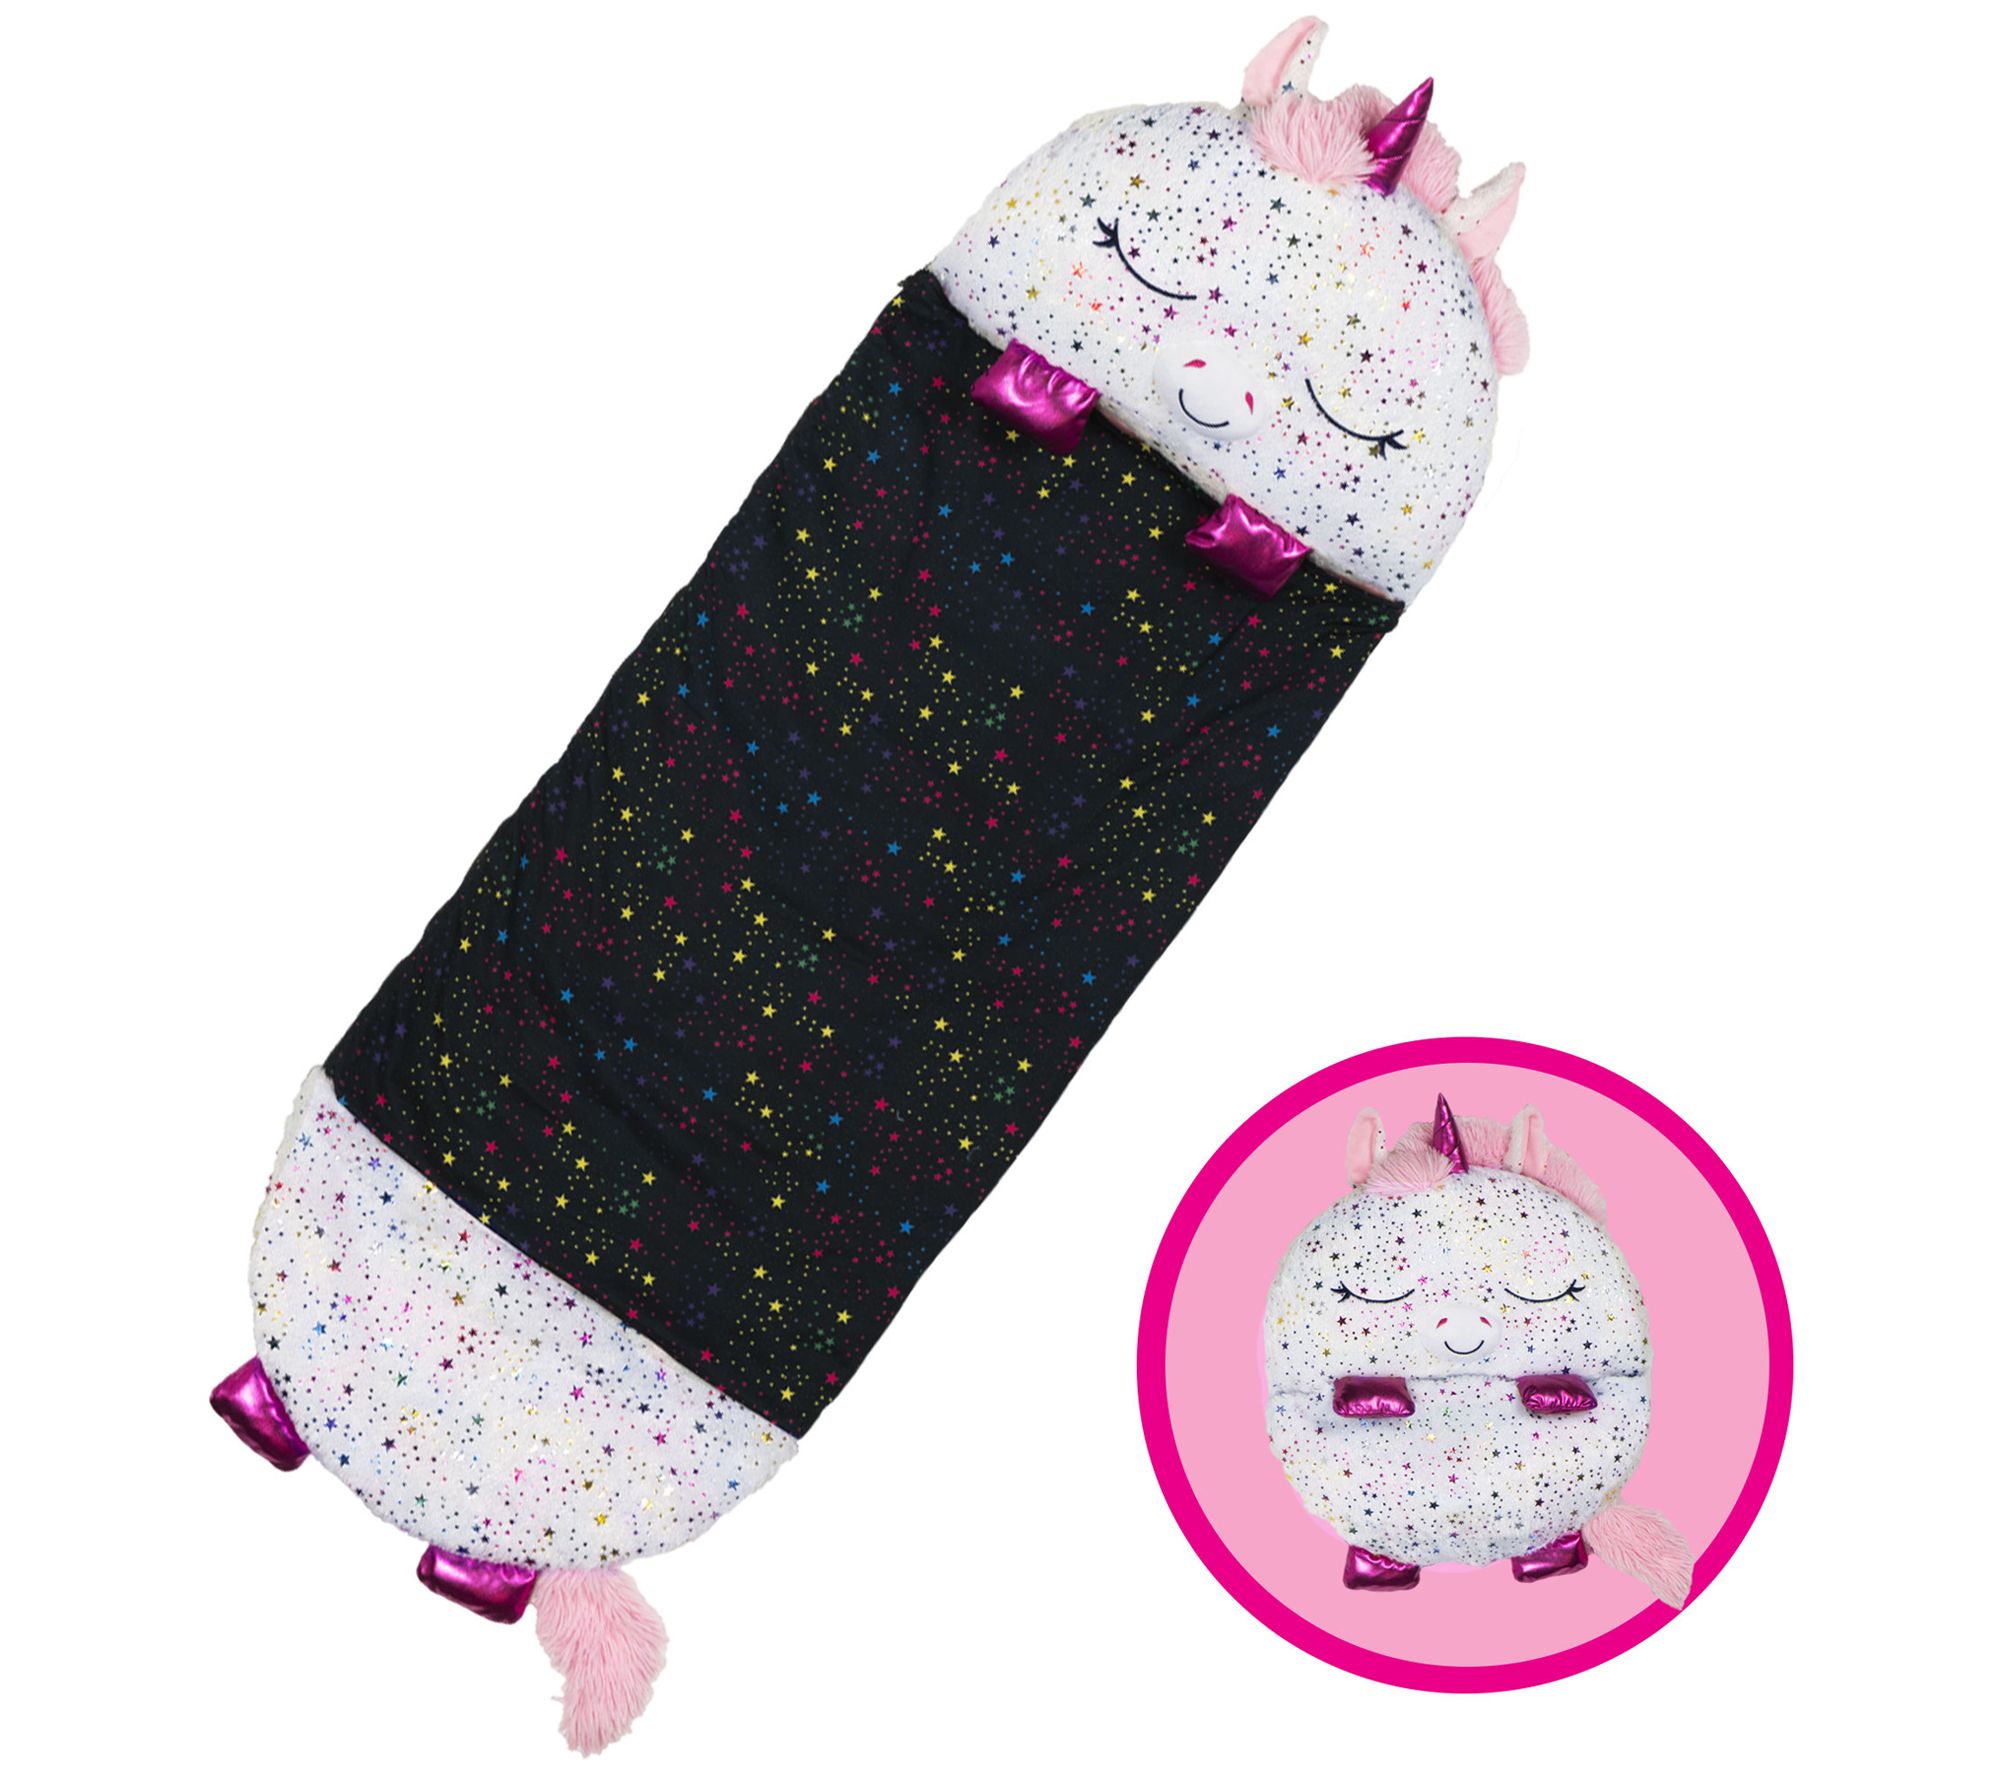 Happy Nappers Soft Plush Play Pillow and Sleeping Sack